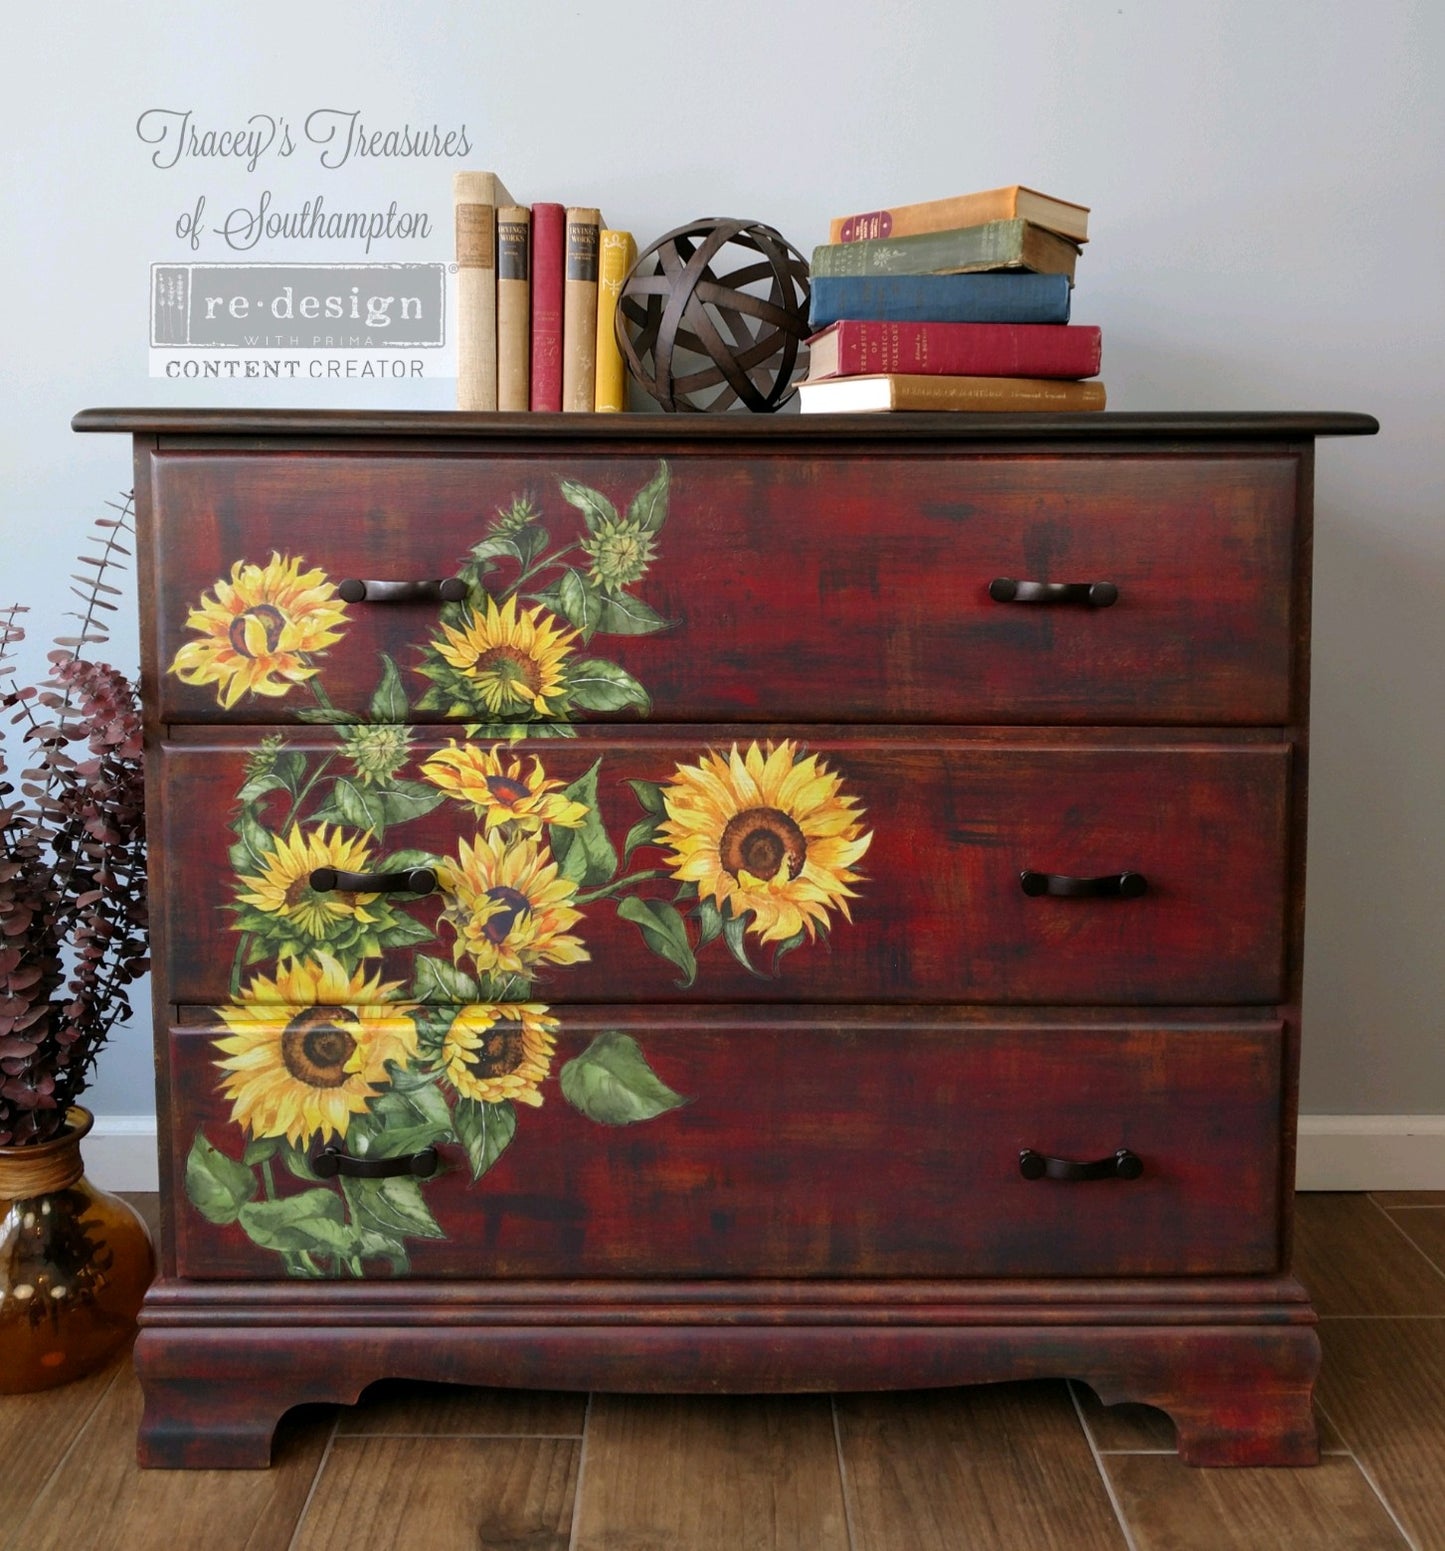 Redesign with Prima Sunflower transfer